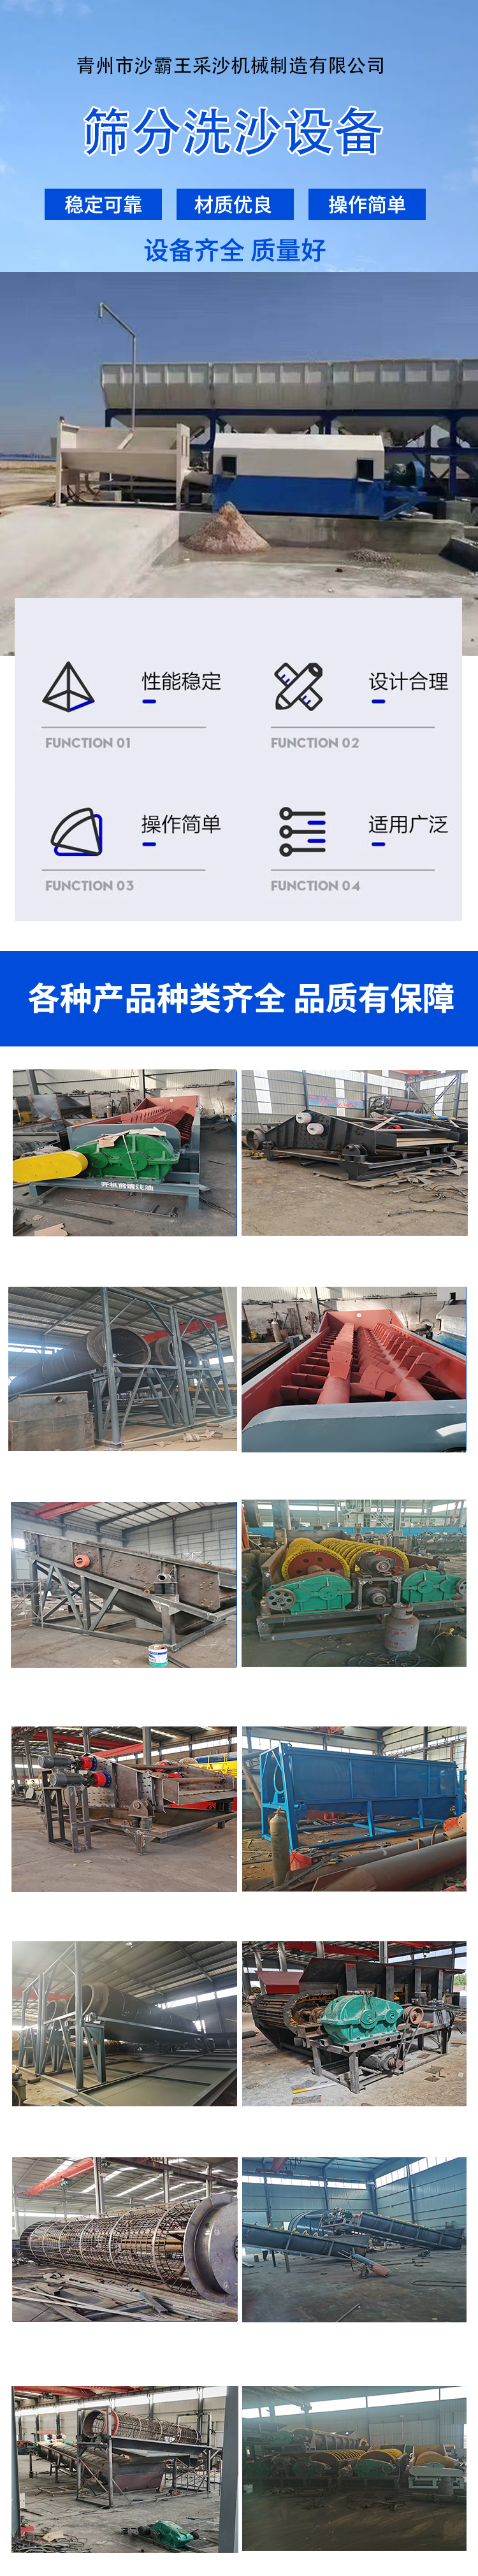 Roller sand screening machine with no shaft feeding, double layer sieve cylinder for screening sand and gravel aggregates, and fine material grading screen can be customized